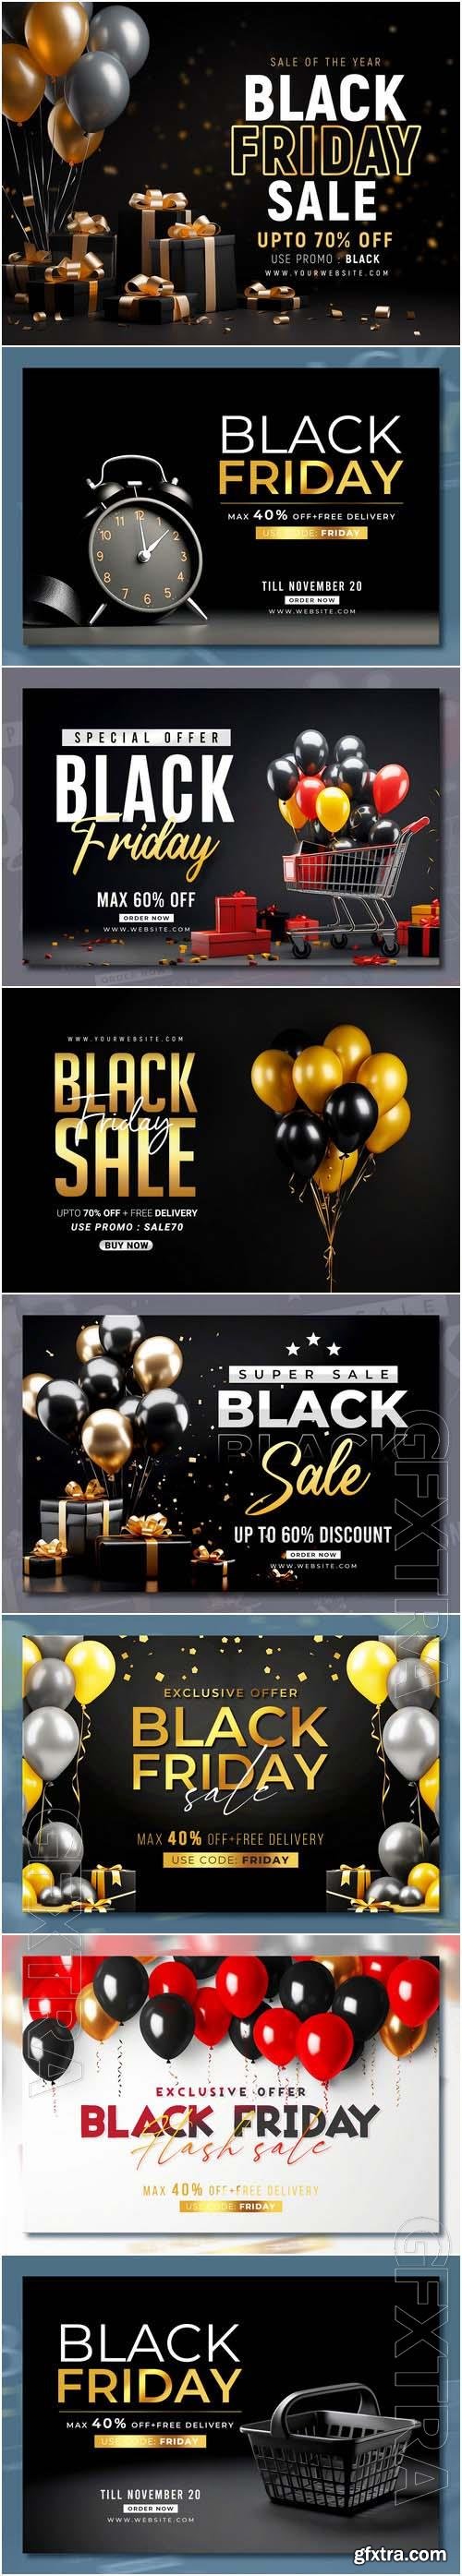 Black friday sale banner with realistic 3d gifts and balloons in psd vol 4